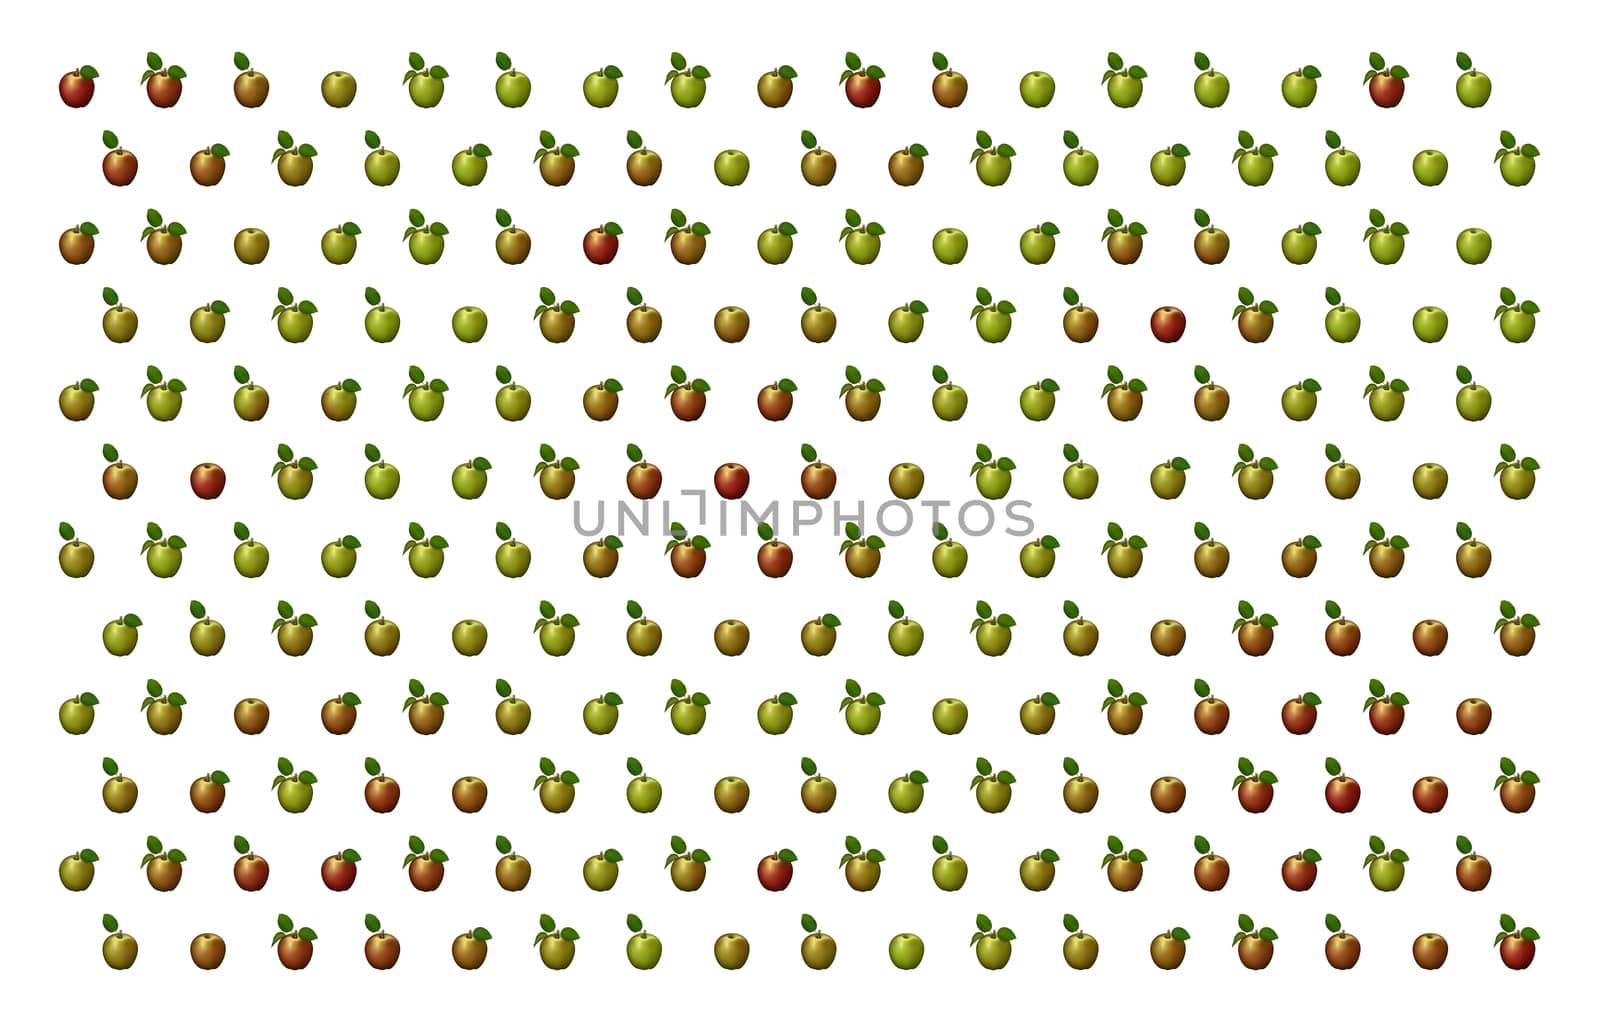 3D illustration of red and green apples arranged in a pattern against a white background.